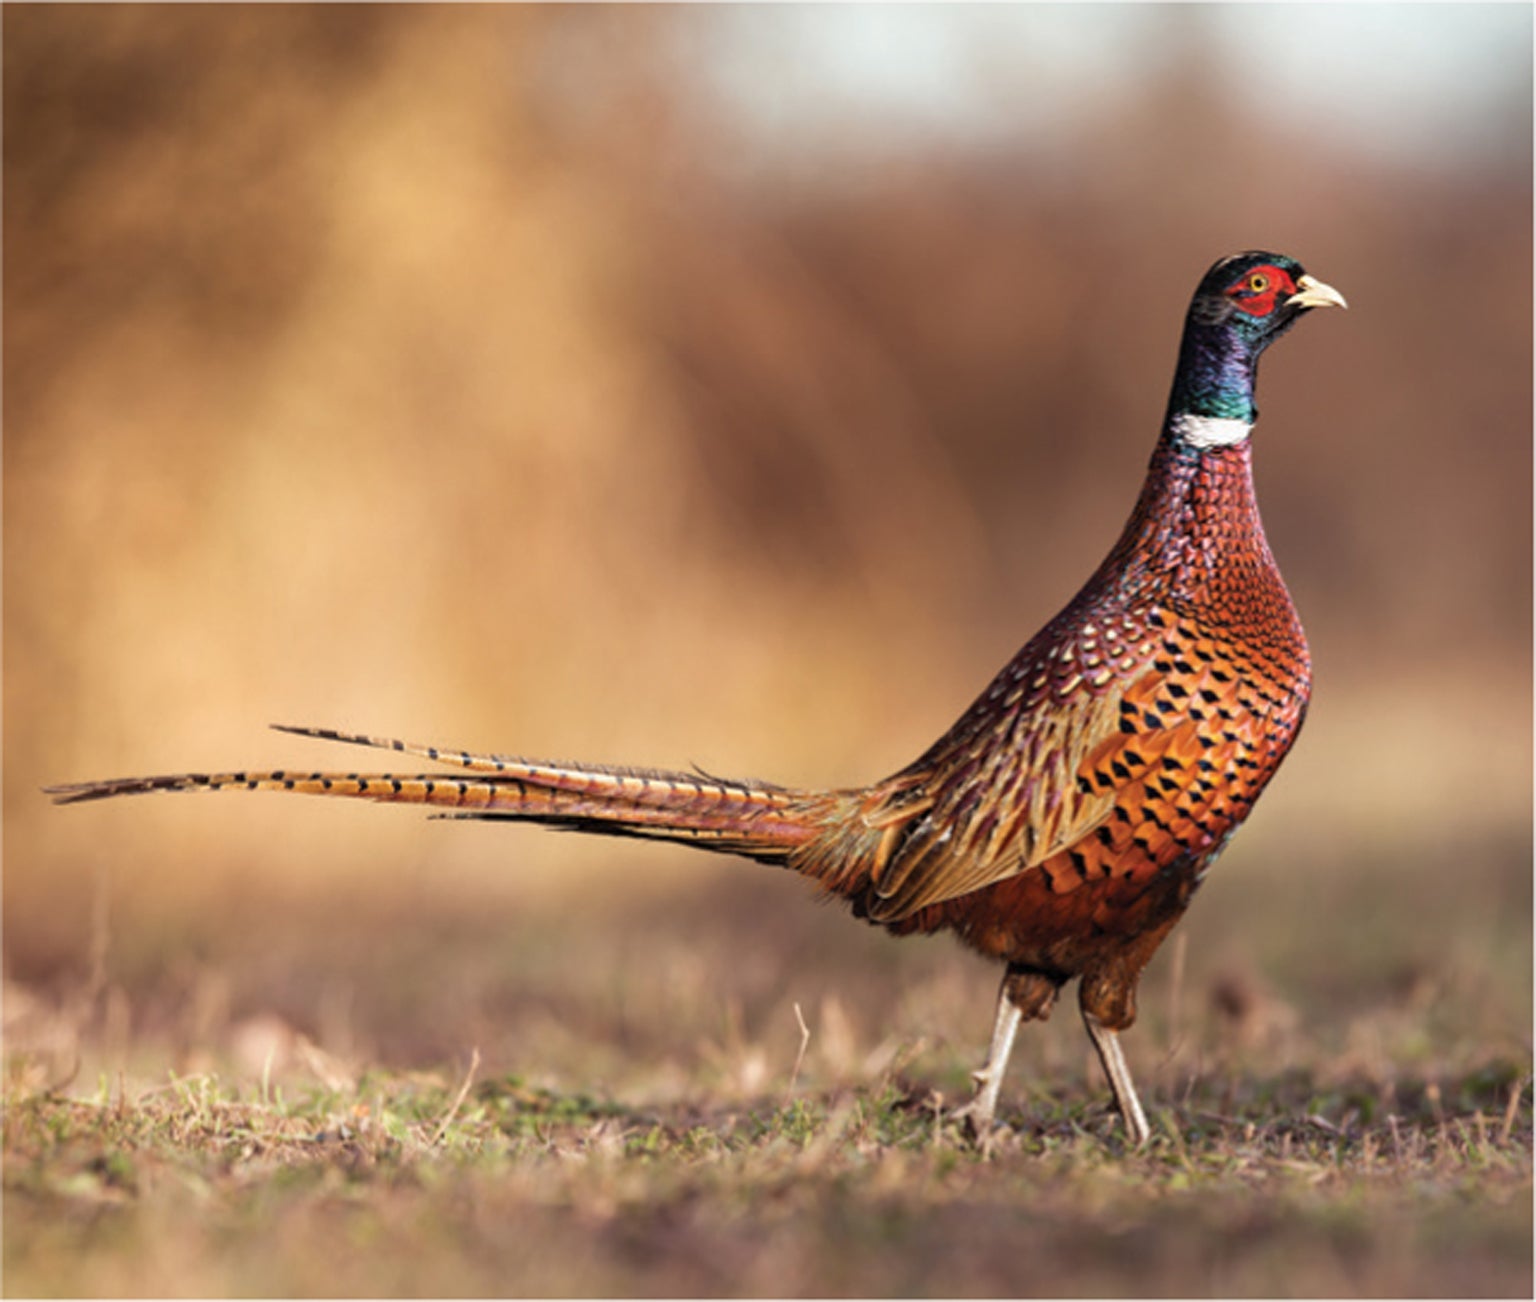 Earliest 'Chickens' Were Actually Pheasants